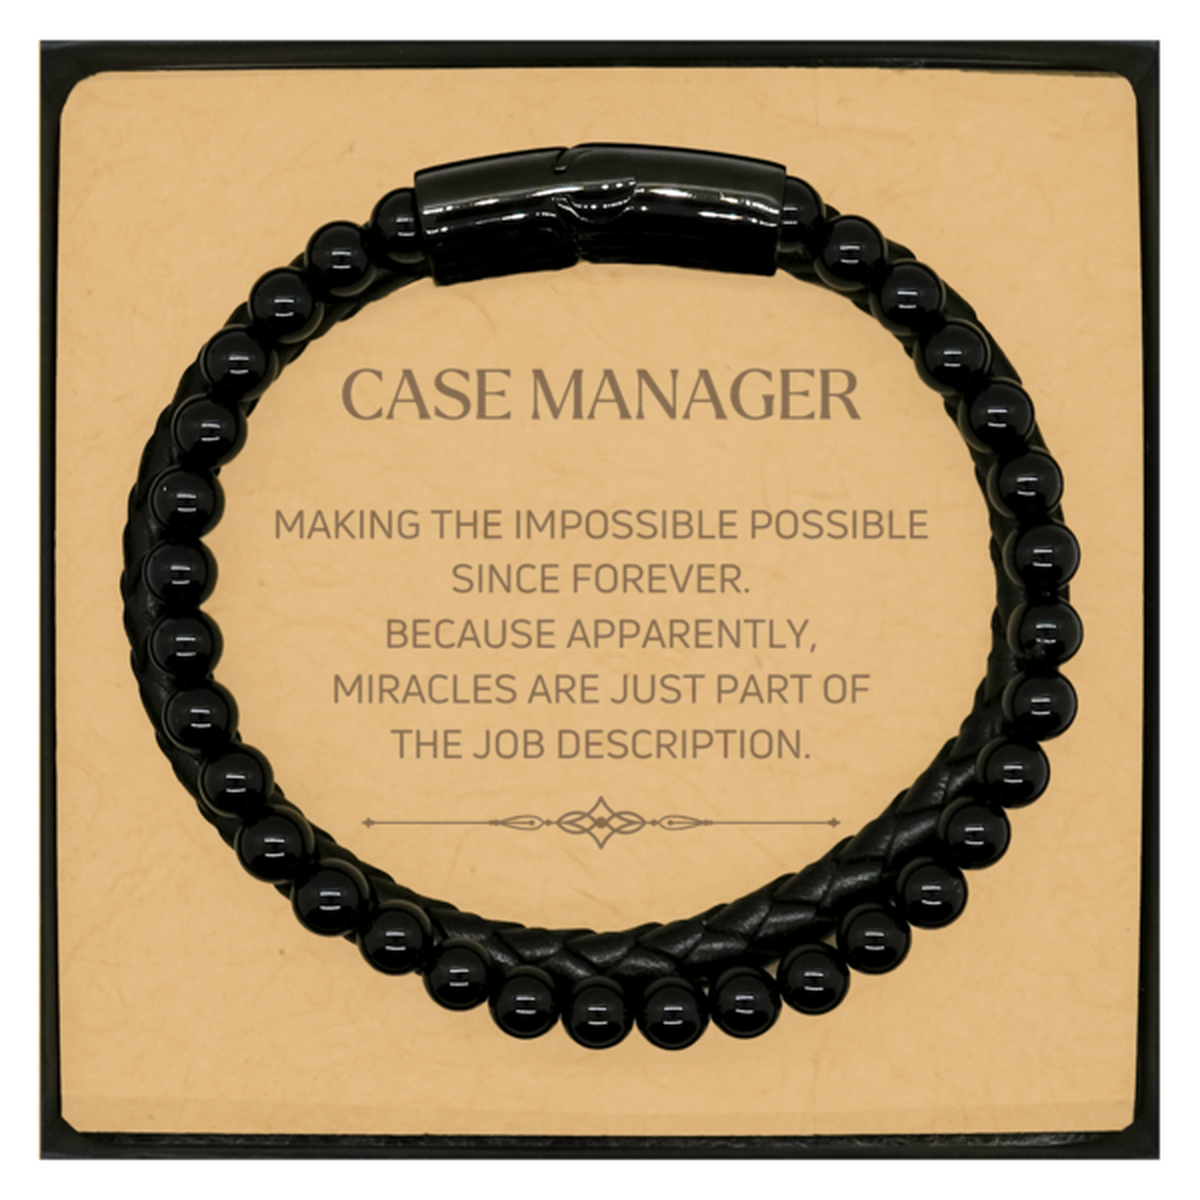 Funny Case Manager Gifts, Miracles are just part of the job description, Inspirational Birthday Christmas Stone Leather Bracelets For Case Manager, Men, Women, Coworkers, Friends, Boss